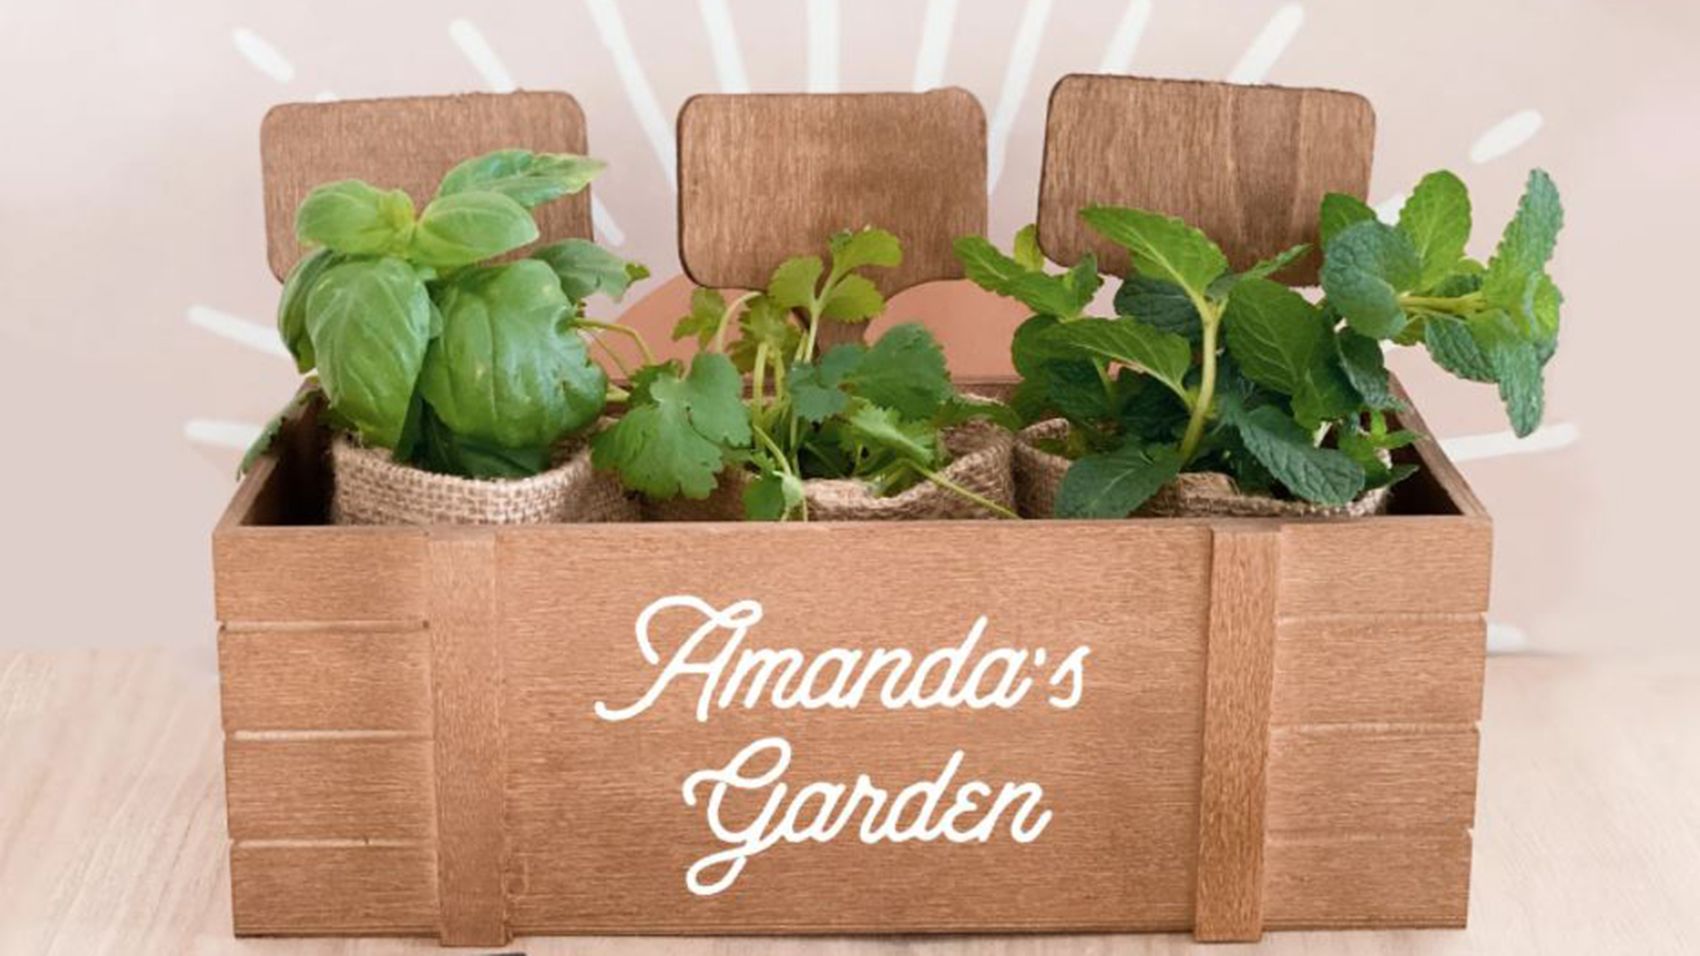 5 Mother's Day Garden Gifts to Buy or DIY - The Handyman's Daughter